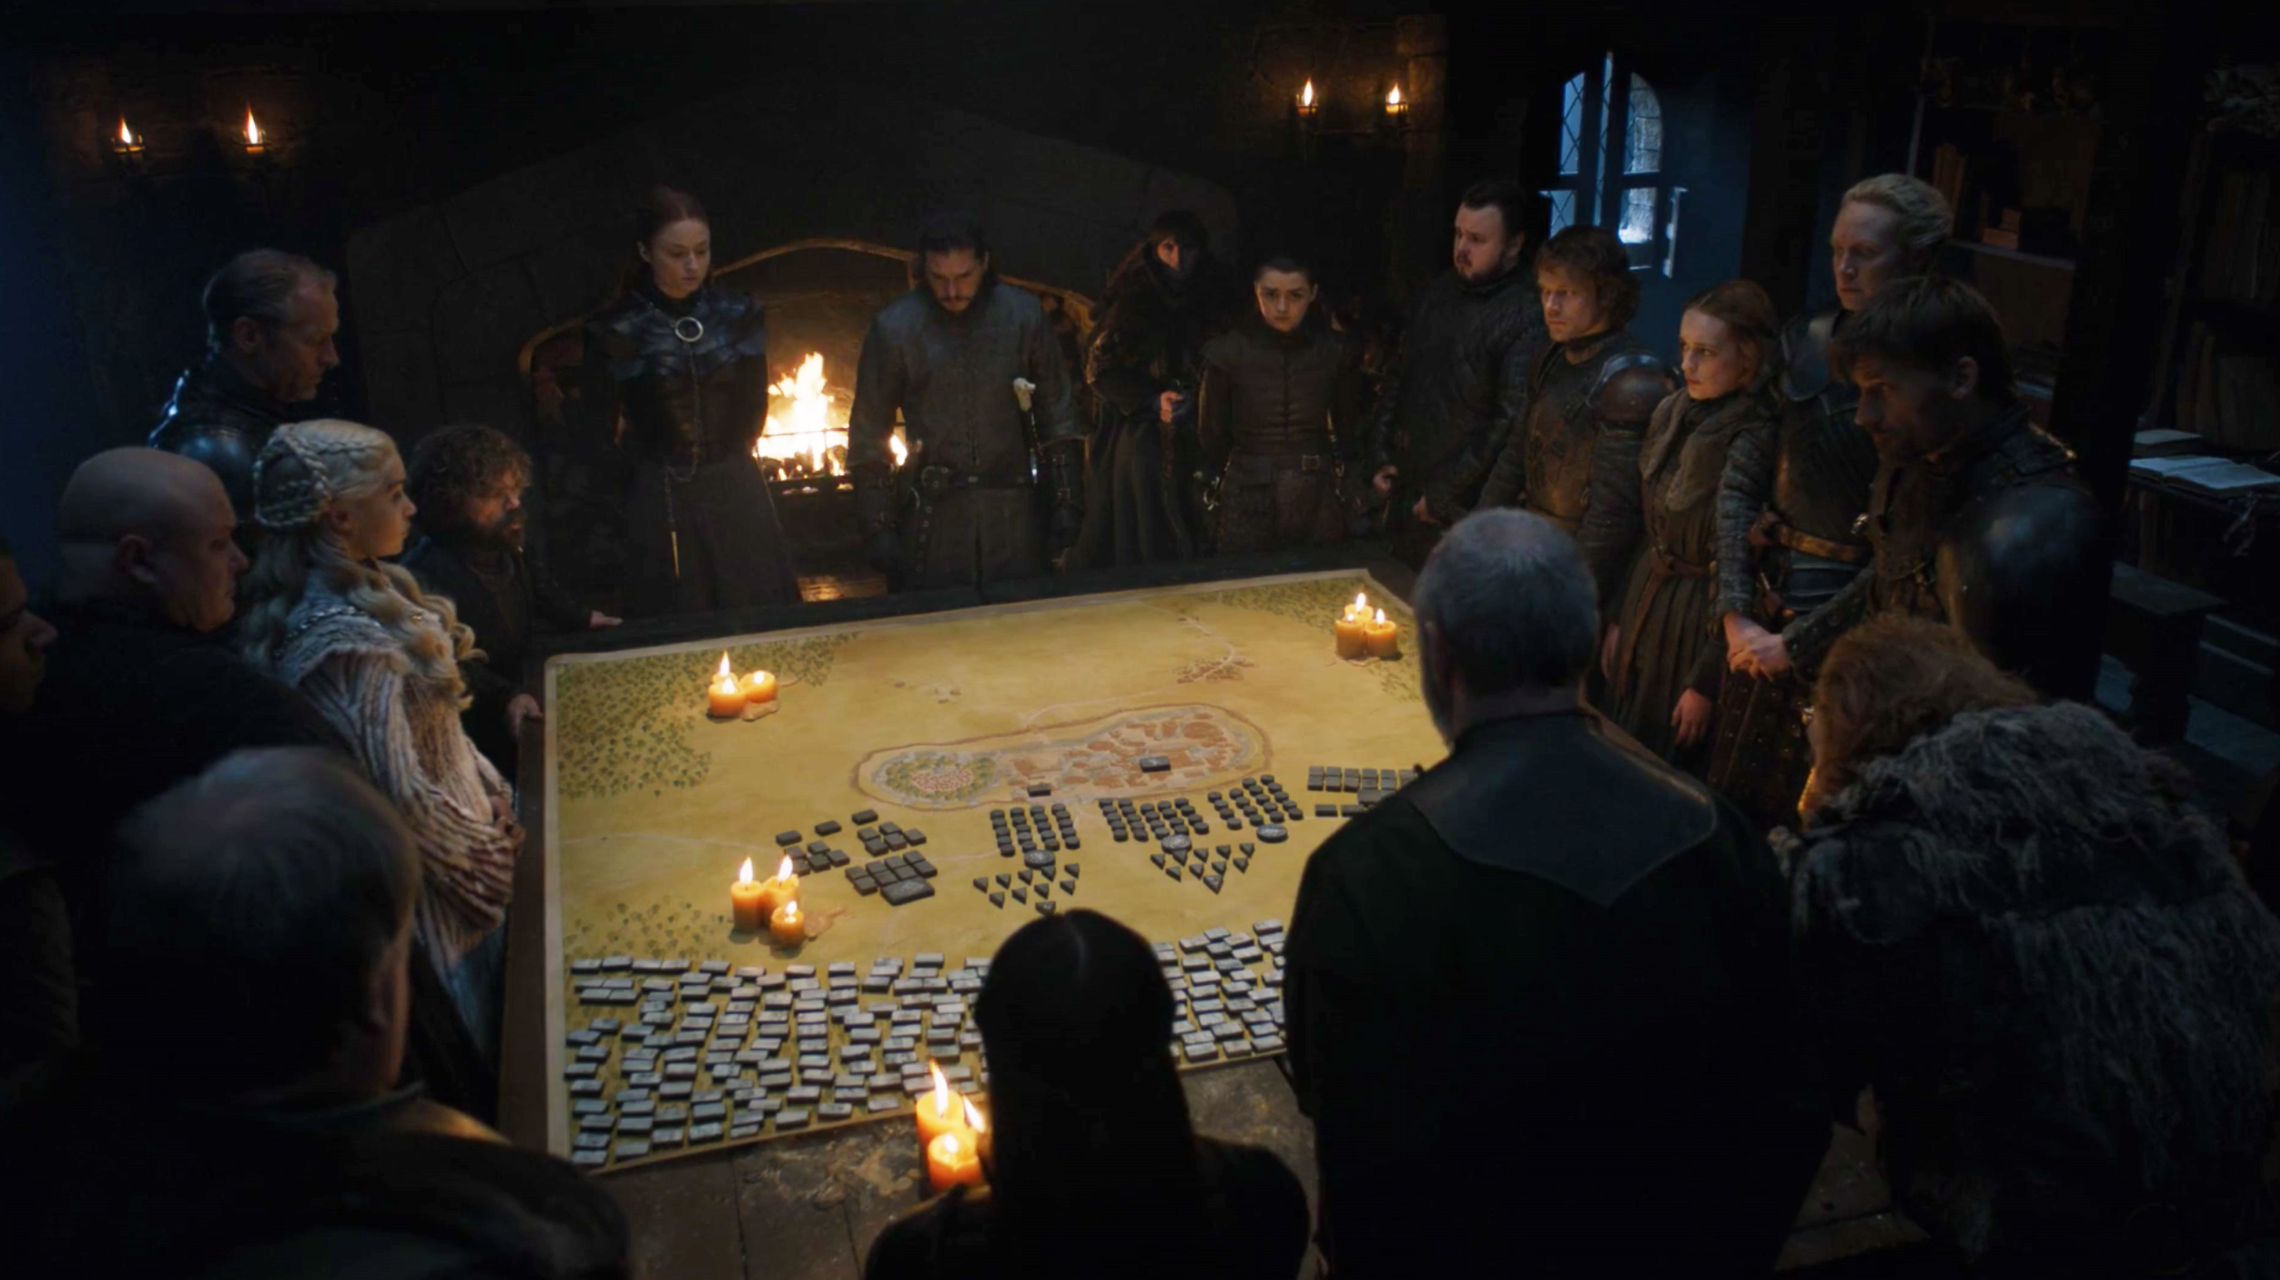 A military officer dissects Jon Snow’s battle strategy (and finds it lacking)